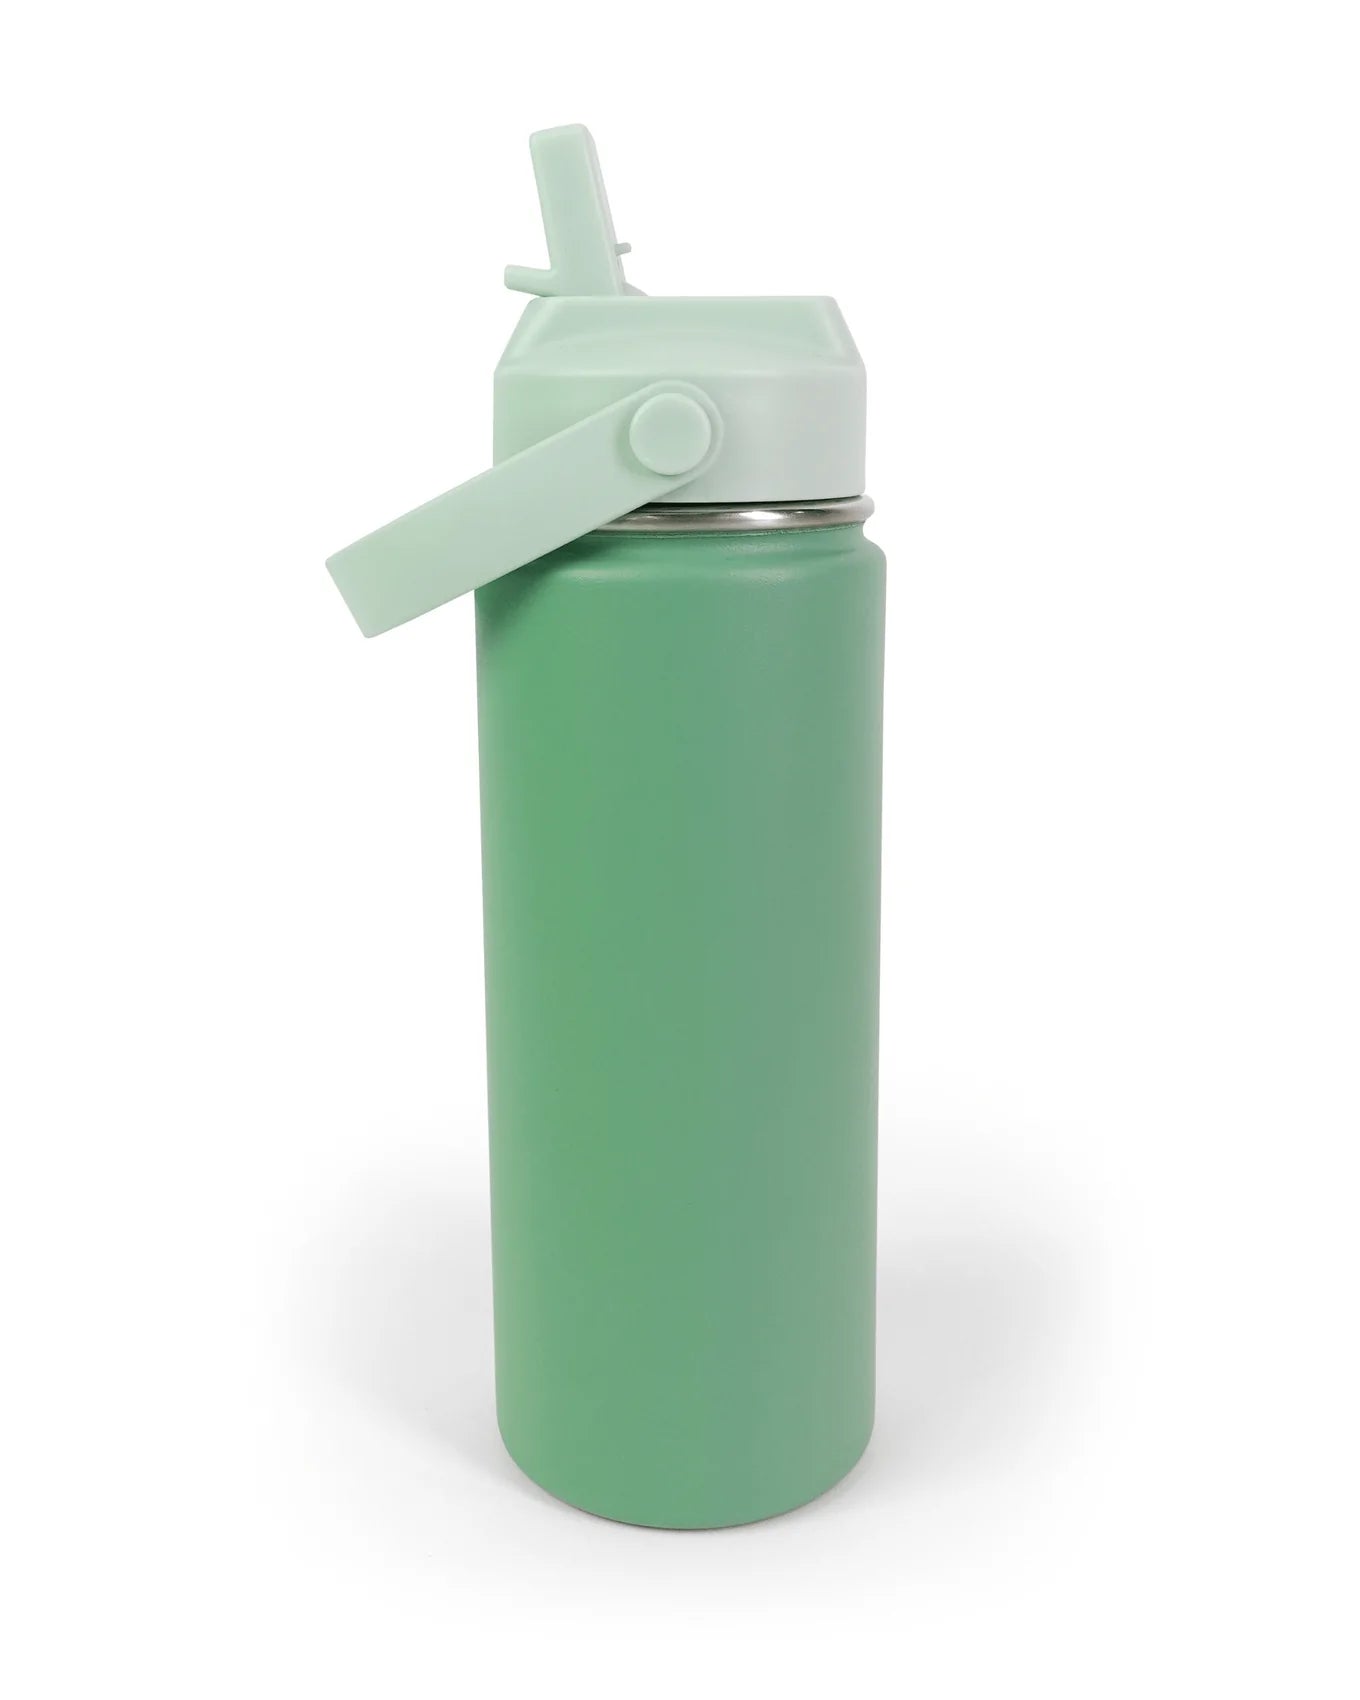 The Somewhere Co Jade Water Bottle 500mL